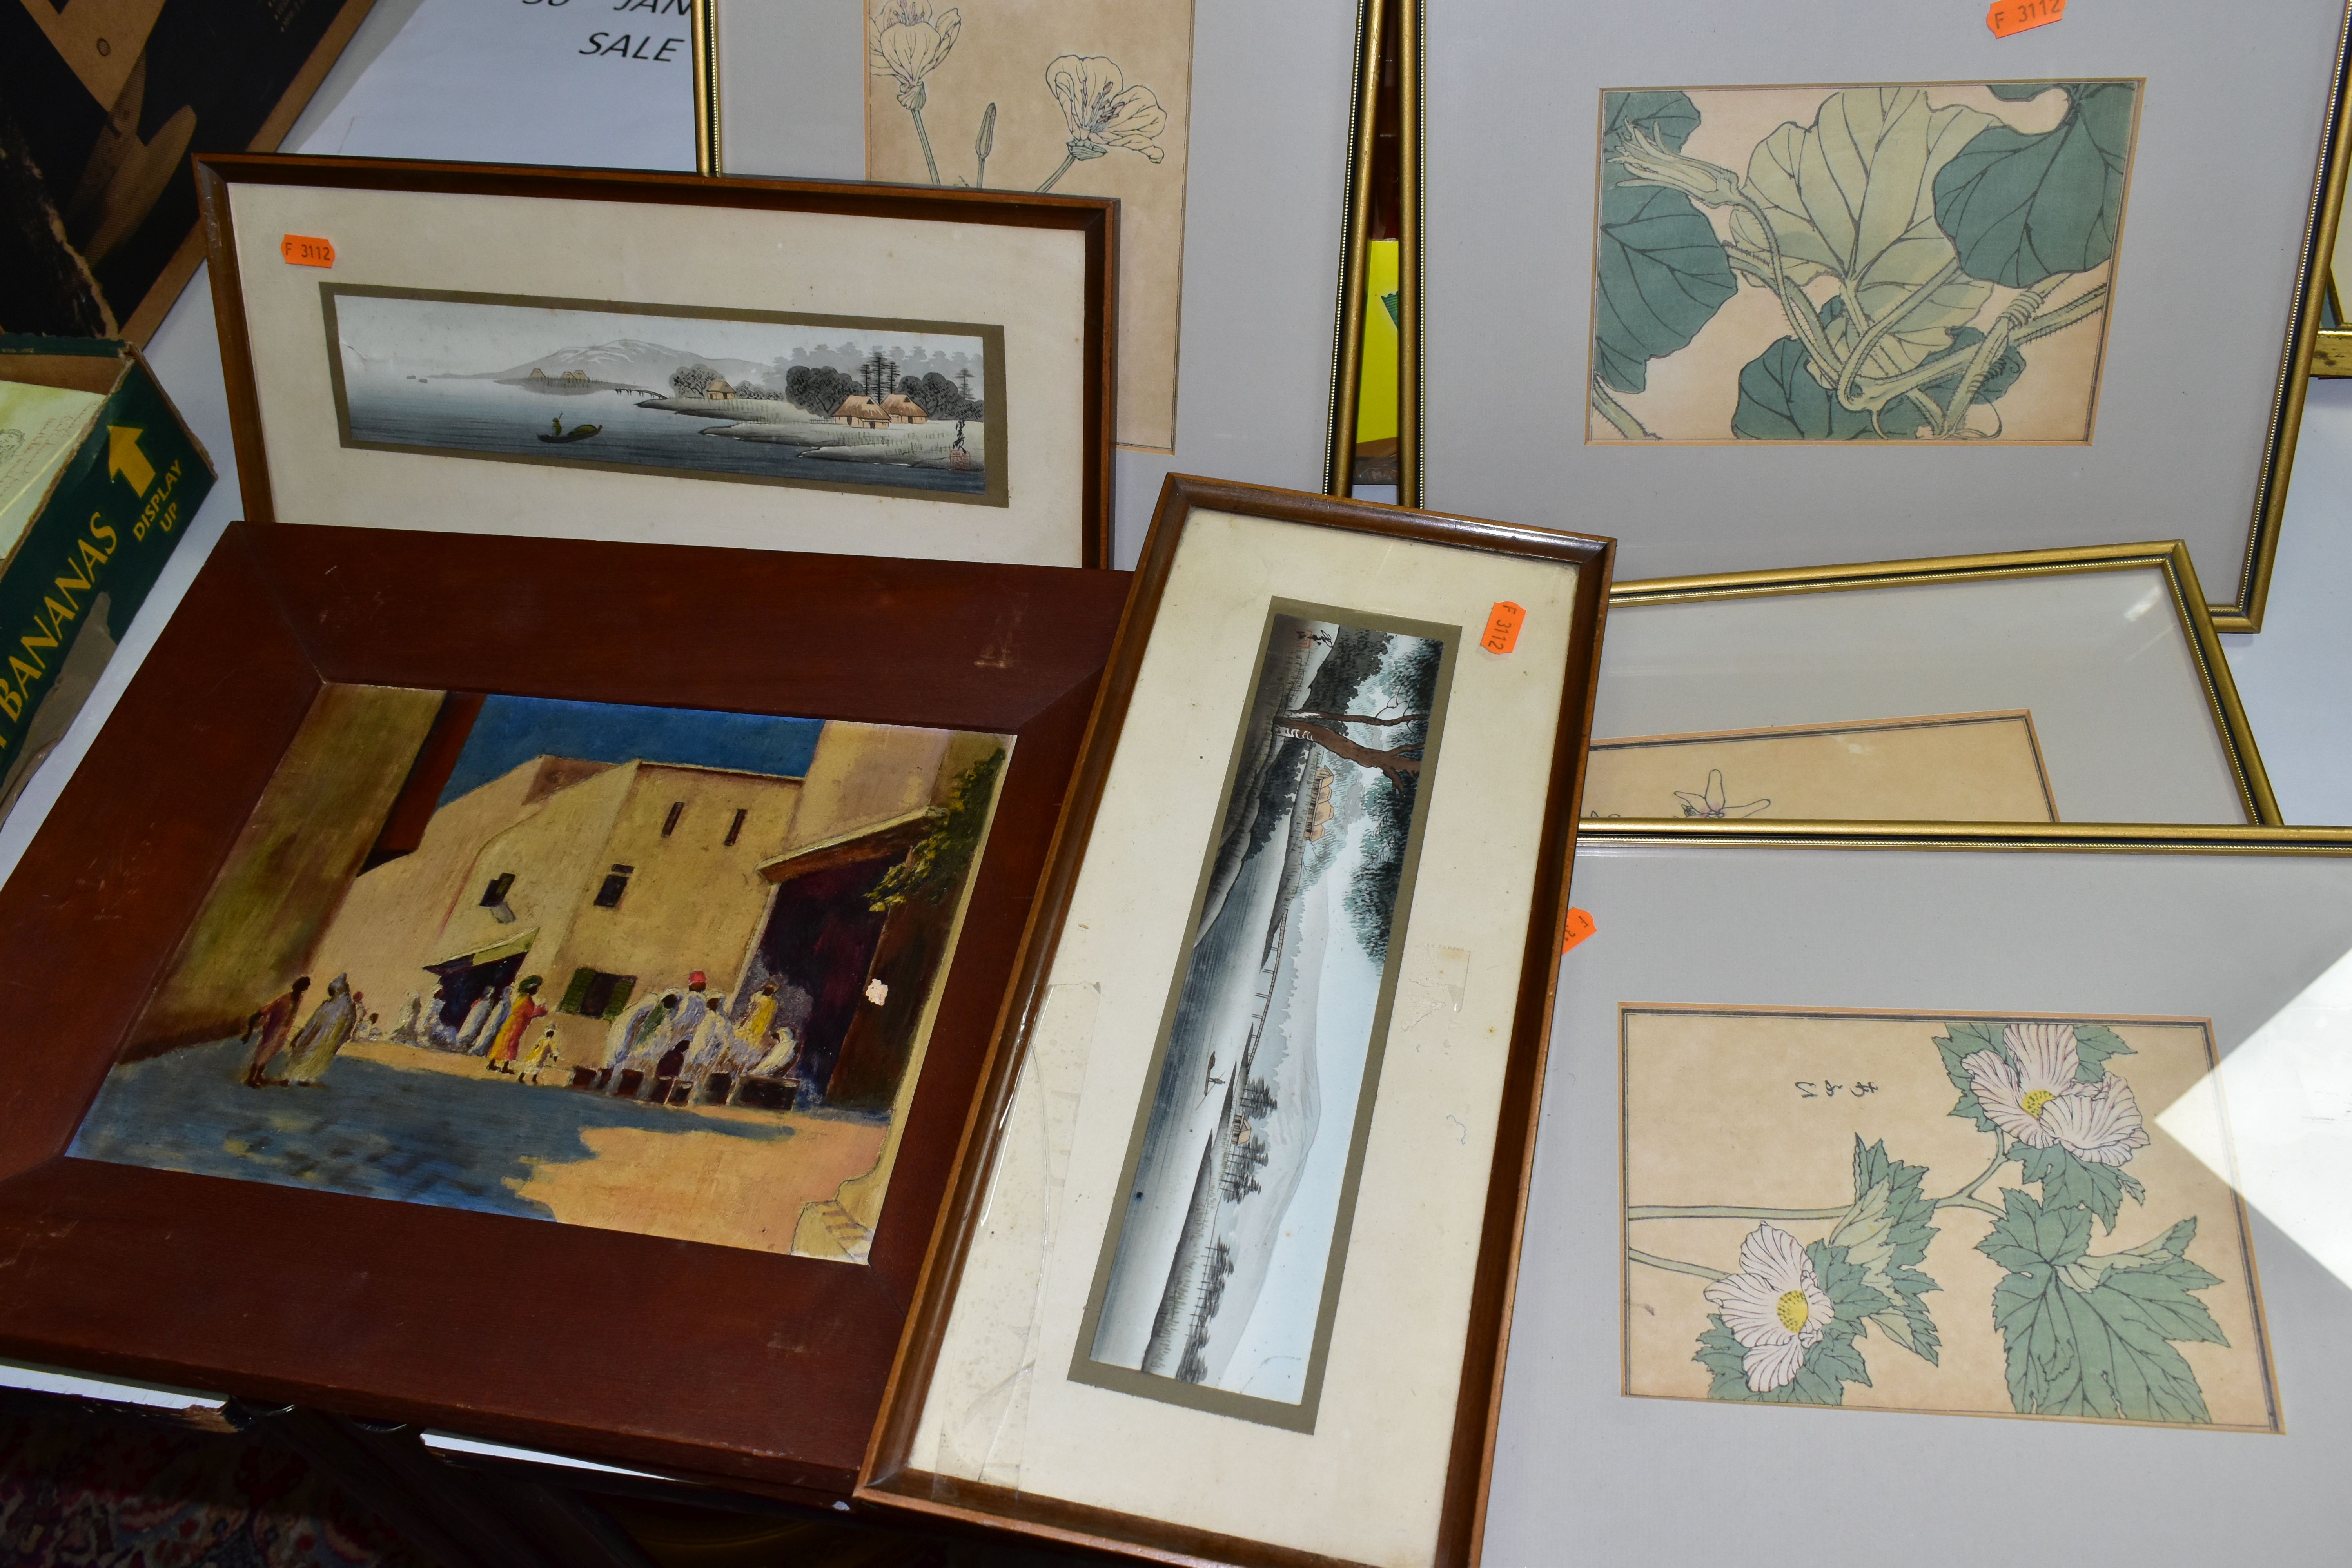 NINE 20TH CENTURY PAINTINGS AND PRINTS, comprising two signed Chinese watercolors depicting river